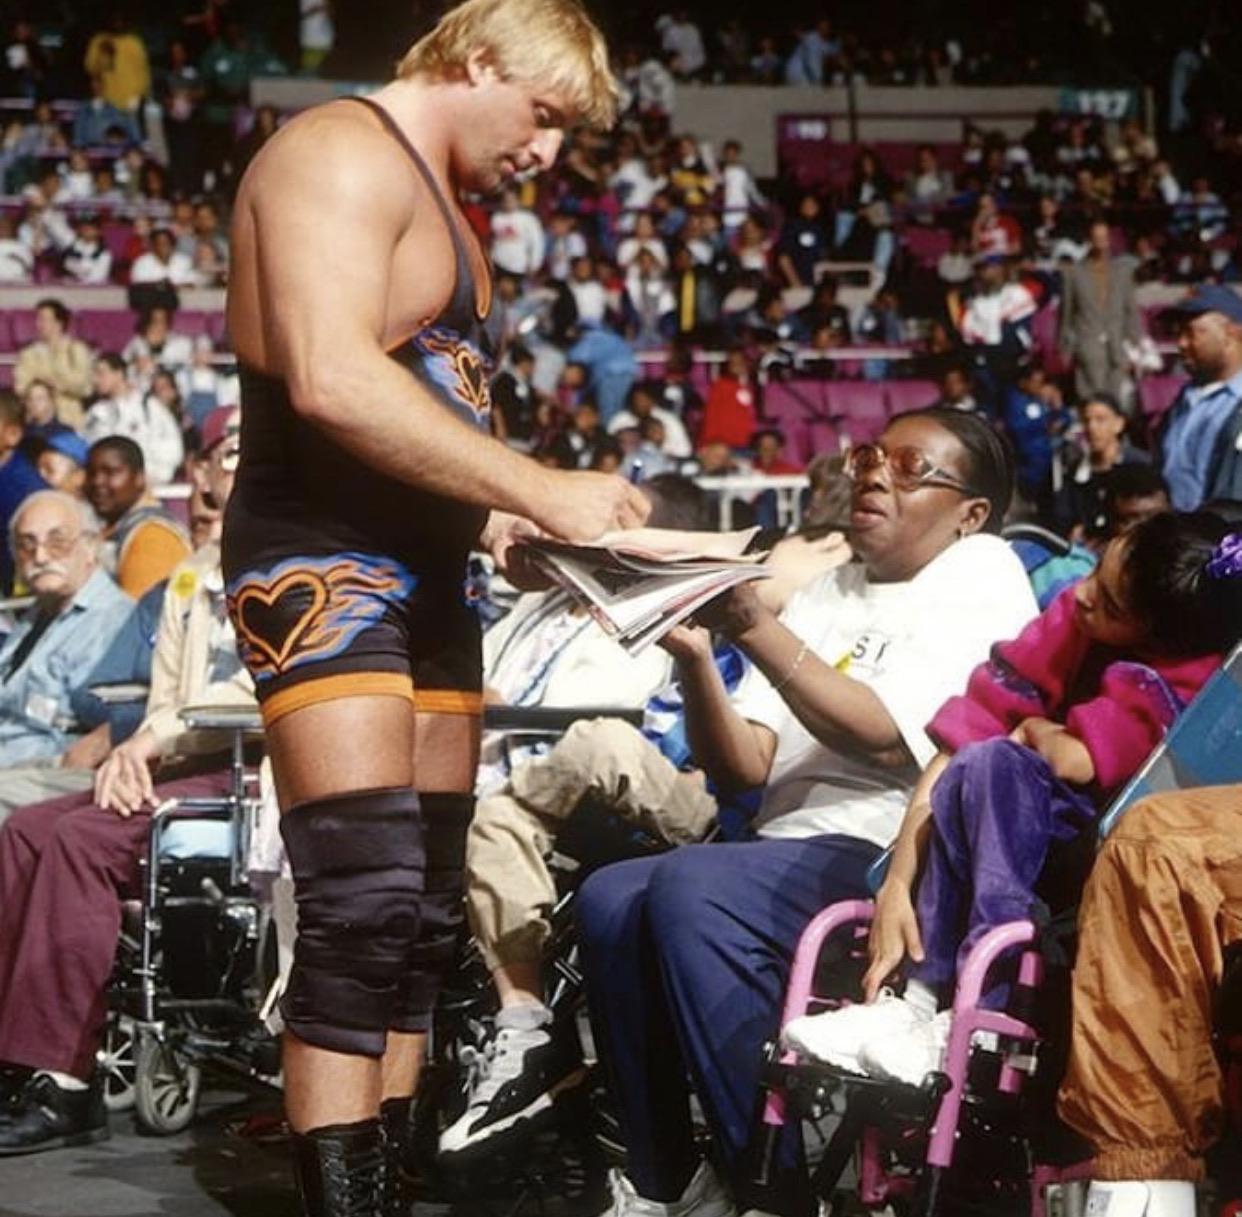 Happy Birthday, Owen Hart.

Owen would have been 56, today.

R.I.P  